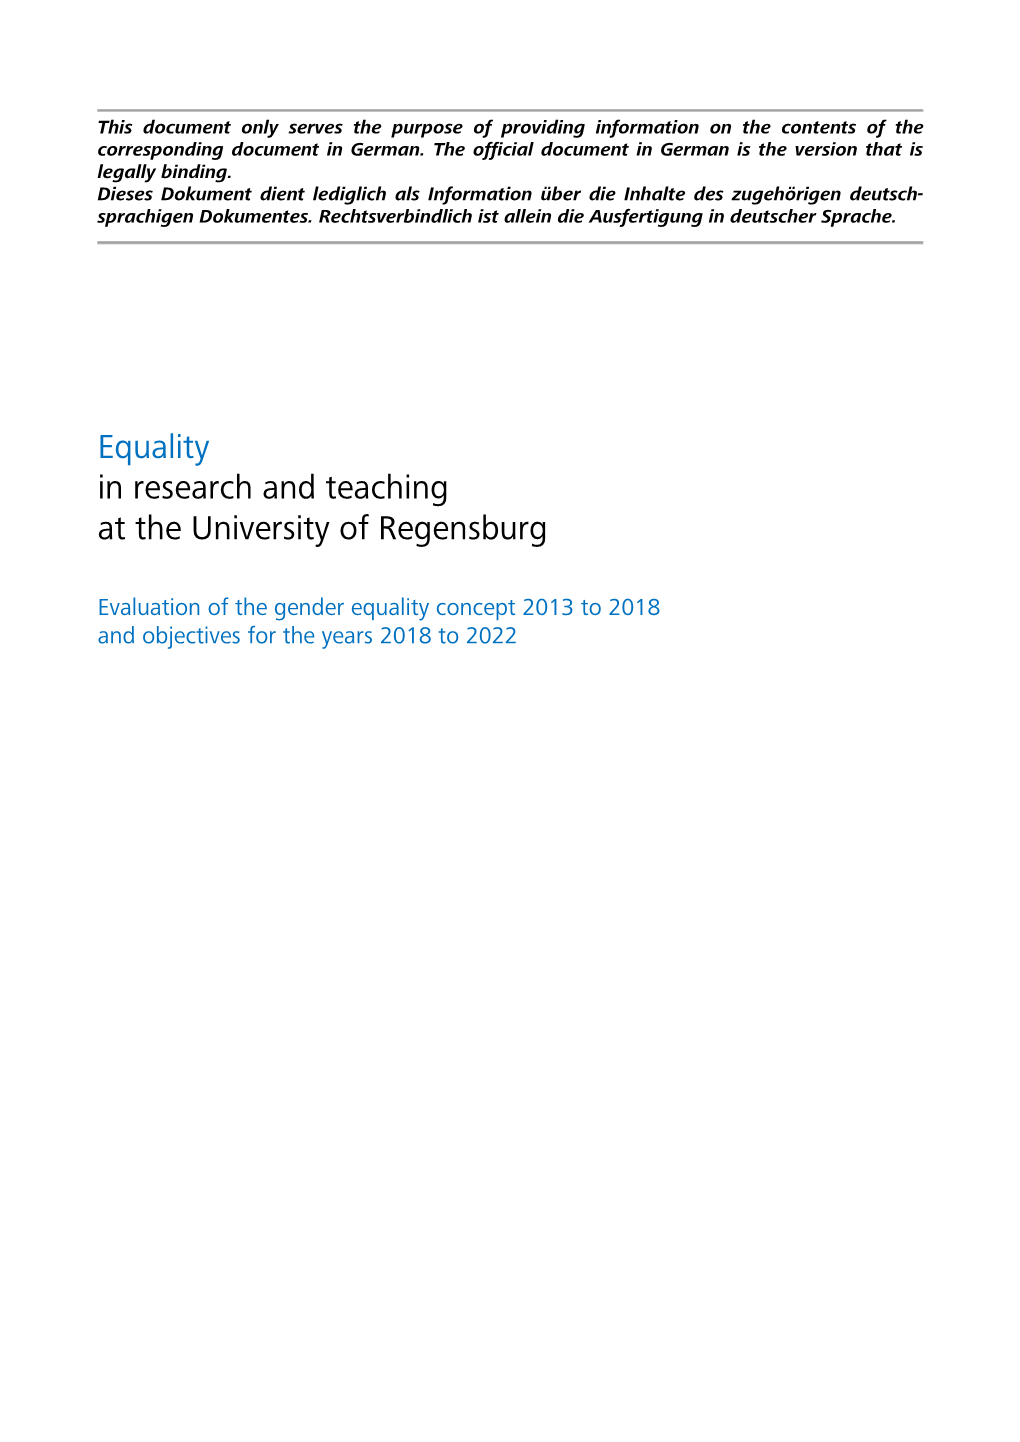 Equality in Research and Teaching at the University of Regensburg